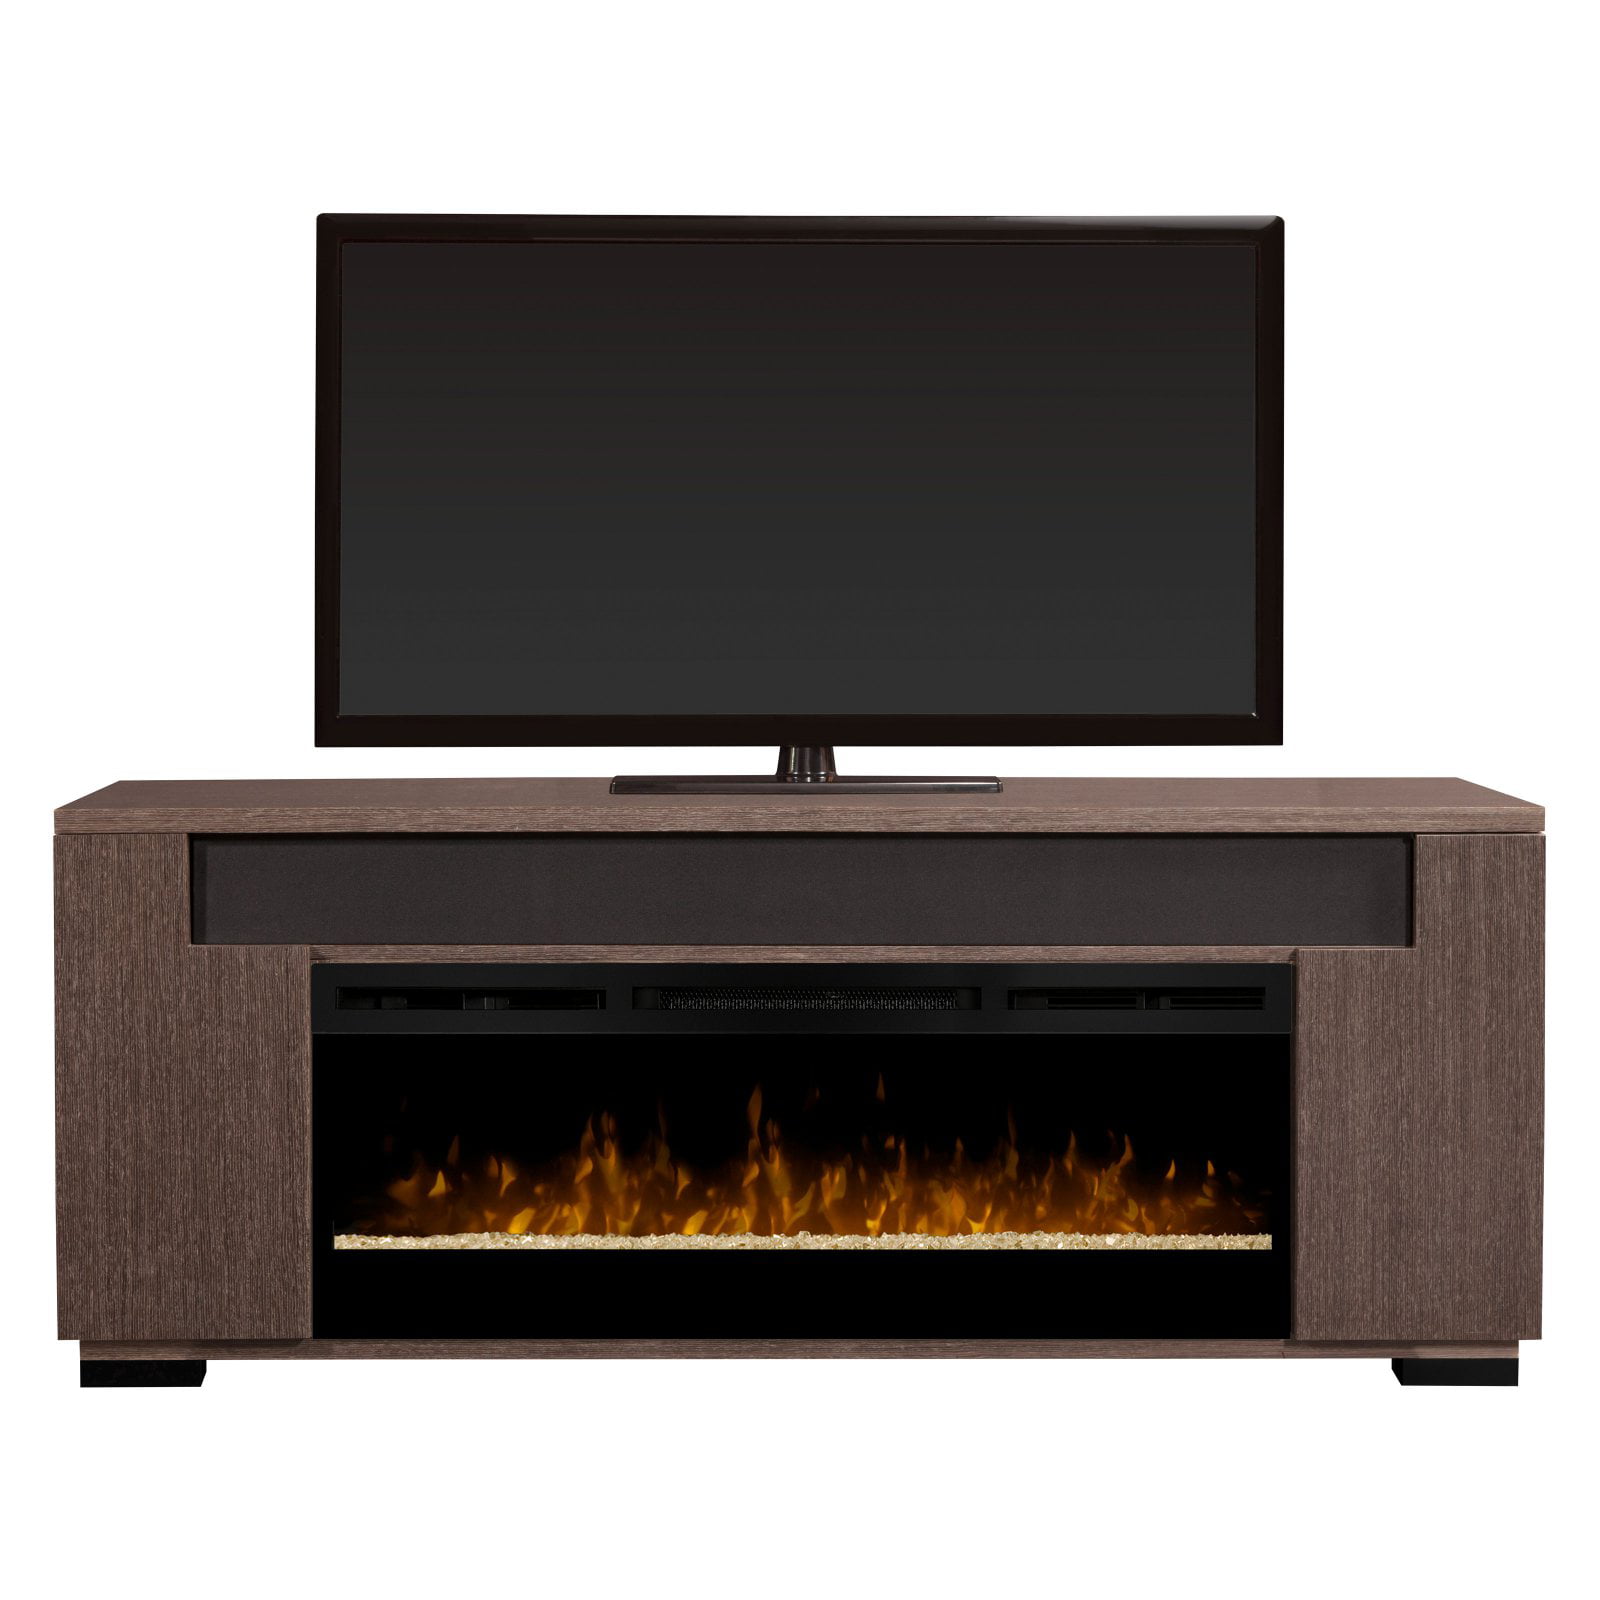 Dimplex Haley Media Console Electric Fireplace With ...